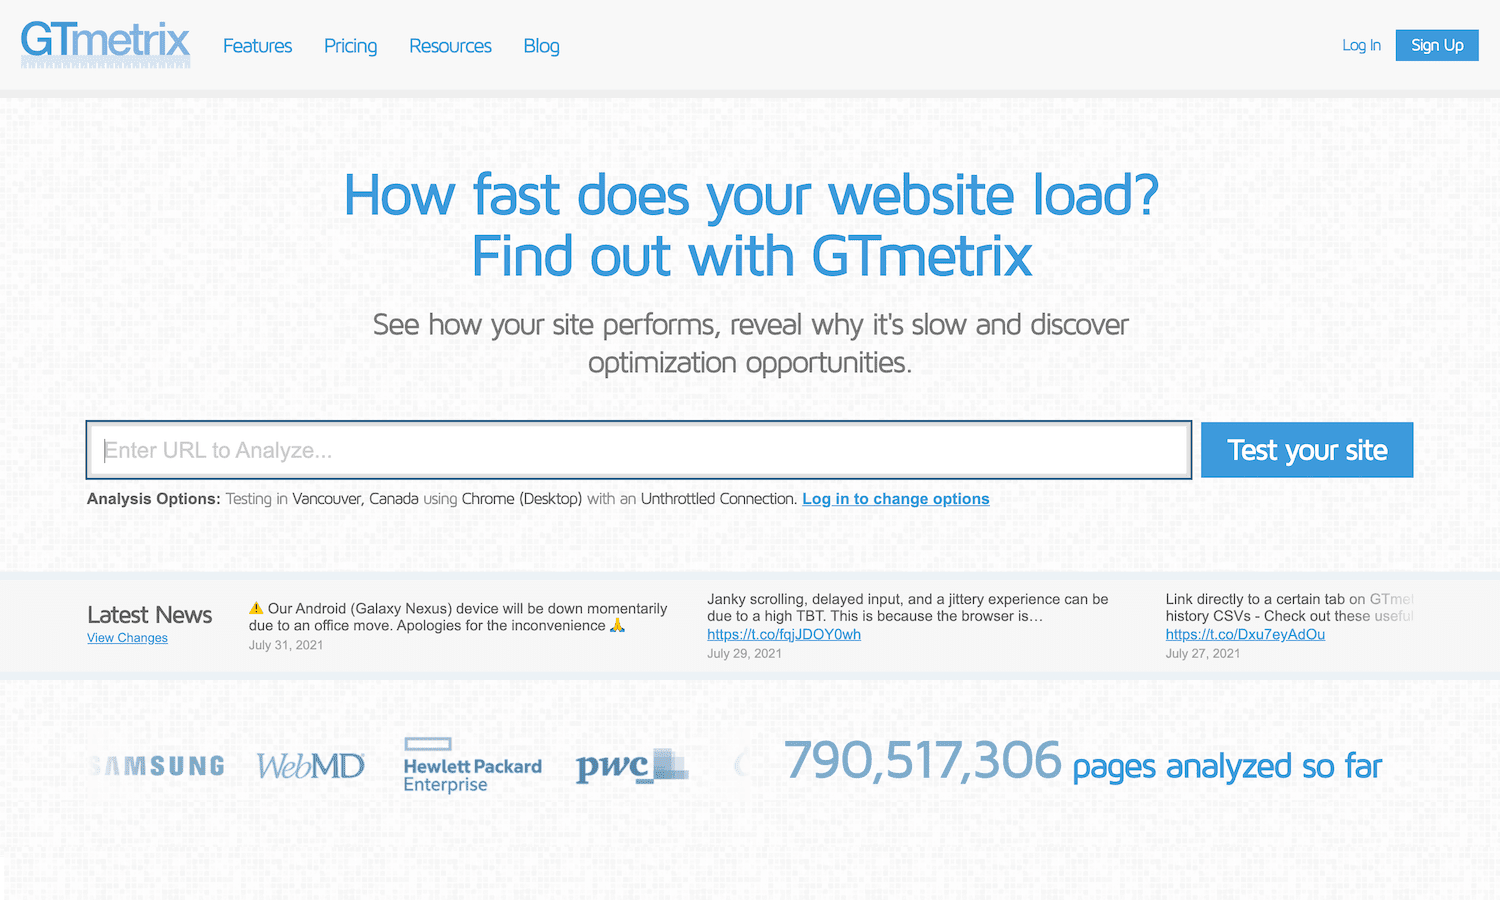 The GTmetrix performance testing tool homepage with the text "How fast does your website load? Find out with GTmetrix".